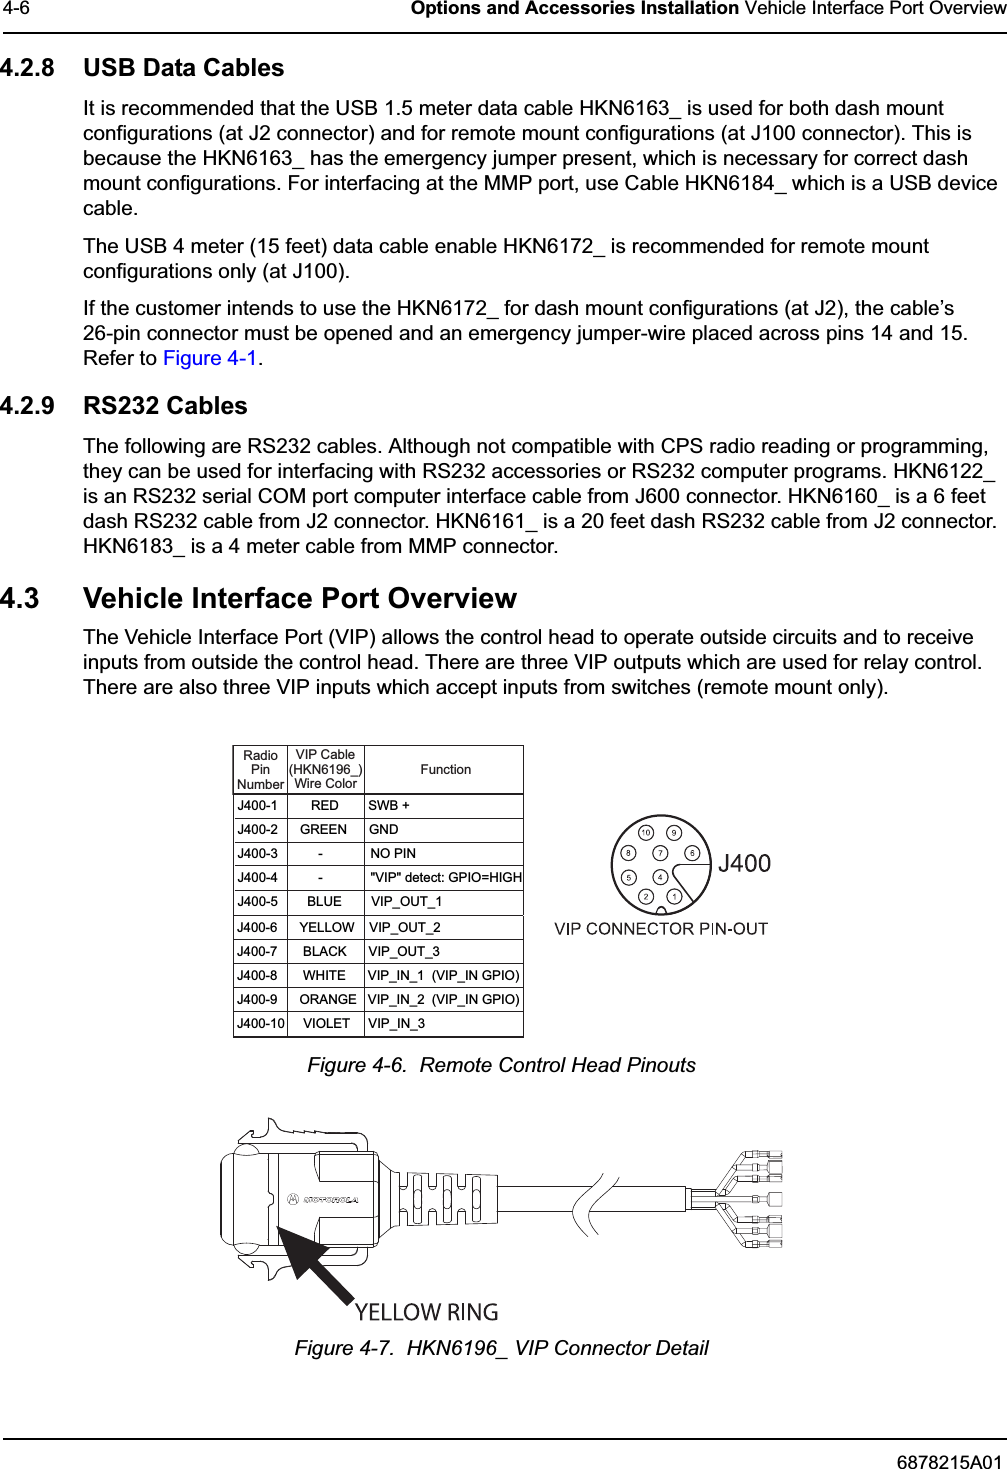 6878215A014-6 Options and Accessories Installation Vehicle Interface Port Overview4.2.8 USB Data CablesIt is recommended that the USB 1.5 meter data cable HKN6163_ is used for both dash mount configurations (at J2 connector) and for remote mount configurations (at J100 connector). This is because the HKN6163_ has the emergency jumper present, which is necessary for correct dash mount configurations. For interfacing at the MMP port, use Cable HKN6184_ which is a USB device cable.The USB 4 meter (15 feet) data cable enable HKN6172_ is recommended for remote mount configurations only (at J100).If the customer intends to use the HKN6172_ for dash mount configurations (at J2), the cable’s 26-pin connector must be opened and an emergency jumper-wire placed across pins 14 and 15. Refer to Figure 4-1.4.2.9 RS232 CablesThe following are RS232 cables. Although not compatible with CPS radio reading or programming, they can be used for interfacing with RS232 accessories or RS232 computer programs. HKN6122_ is an RS232 serial COM port computer interface cable from J600 connector. HKN6160_ is a 6 feet dash RS232 cable from J2 connector. HKN6161_ is a 20 feet dash RS232 cable from J2 connector. HKN6183_ is a 4 meter cable from MMP connector.4.3 Vehicle Interface Port OverviewThe Vehicle Interface Port (VIP) allows the control head to operate outside circuits and to receive inputs from outside the control head. There are three VIP outputs which are used for relay control. There are also three VIP inputs which accept inputs from switches (remote mount only). Figure 4-6.  Remote Control Head PinoutsFigure 4-7.  HKN6196_ VIP Connector DetailJ400-1         RED        SWB +J400-2      GREEN      GNDJ400-3           -             NO PINJ400-4           -             &quot;VIP&quot; detect: GPIO=HIGHJ400-5        BLUE        VIP_OUT_1 J400-6      YELLOW    VIP_OUT_2J400-7       BLACK      VIP_OUT_3J400-8       WHITE      VIP_IN_1  (VIP_IN GPIO)J400-9      ORANGE   VIP_IN_2  (VIP_IN GPIO)J400-10     VIOLET     VIP_IN_3 RadioPinNumberVIP Cable(HKN6196_)Wire ColorFunction